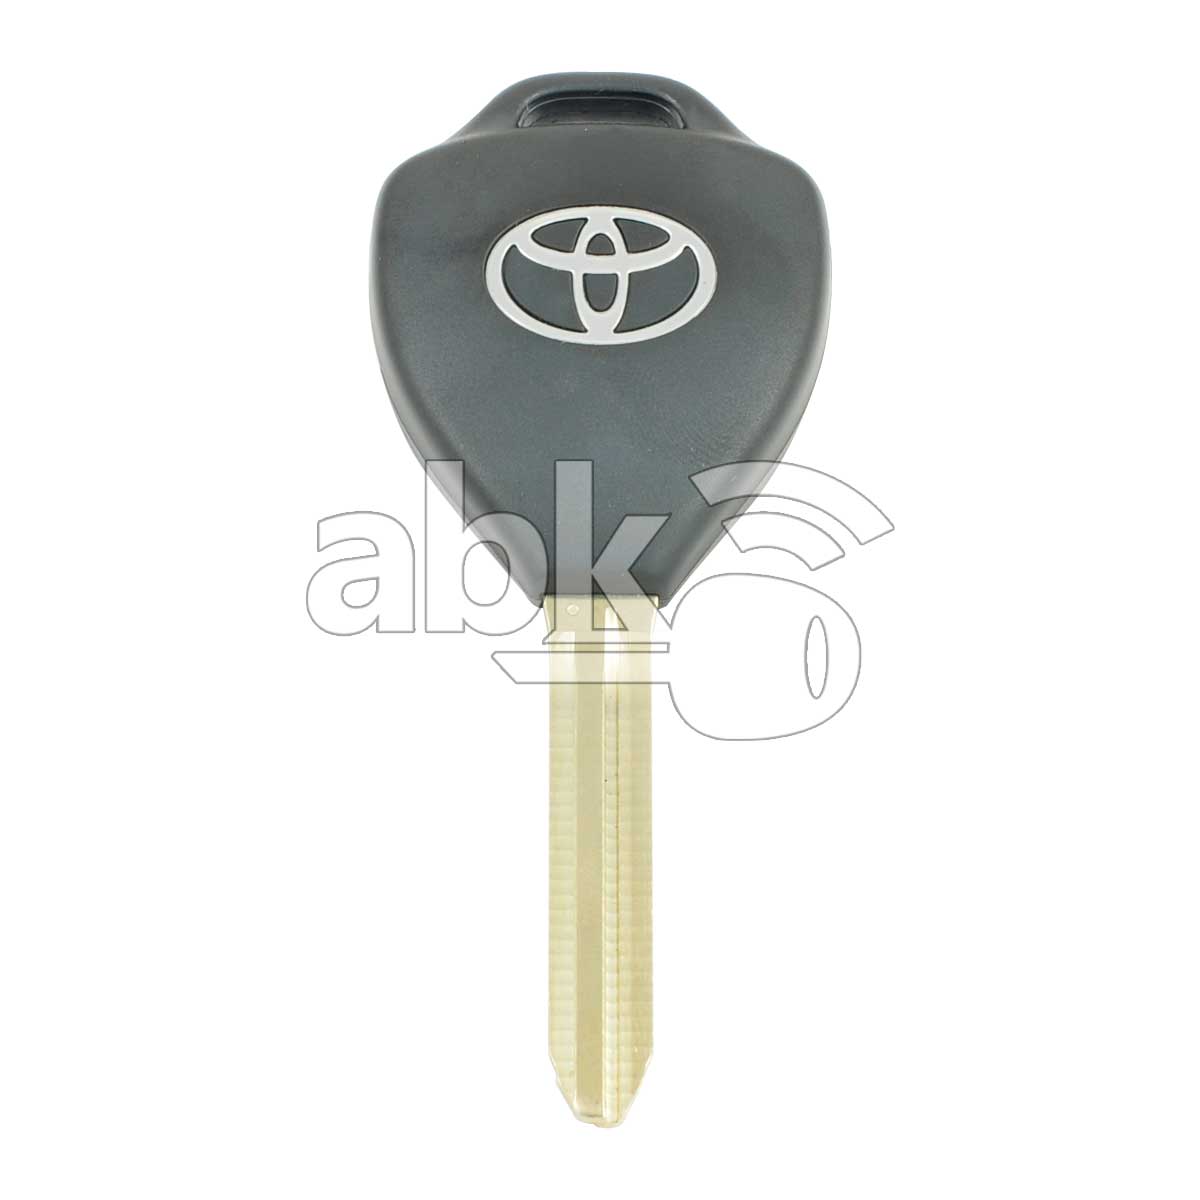 Genuine Toyota Yaris Fortuner 2006+ Key Head Remote 2Buttons 89070-52E61 433MHz B41TA TOY43 -